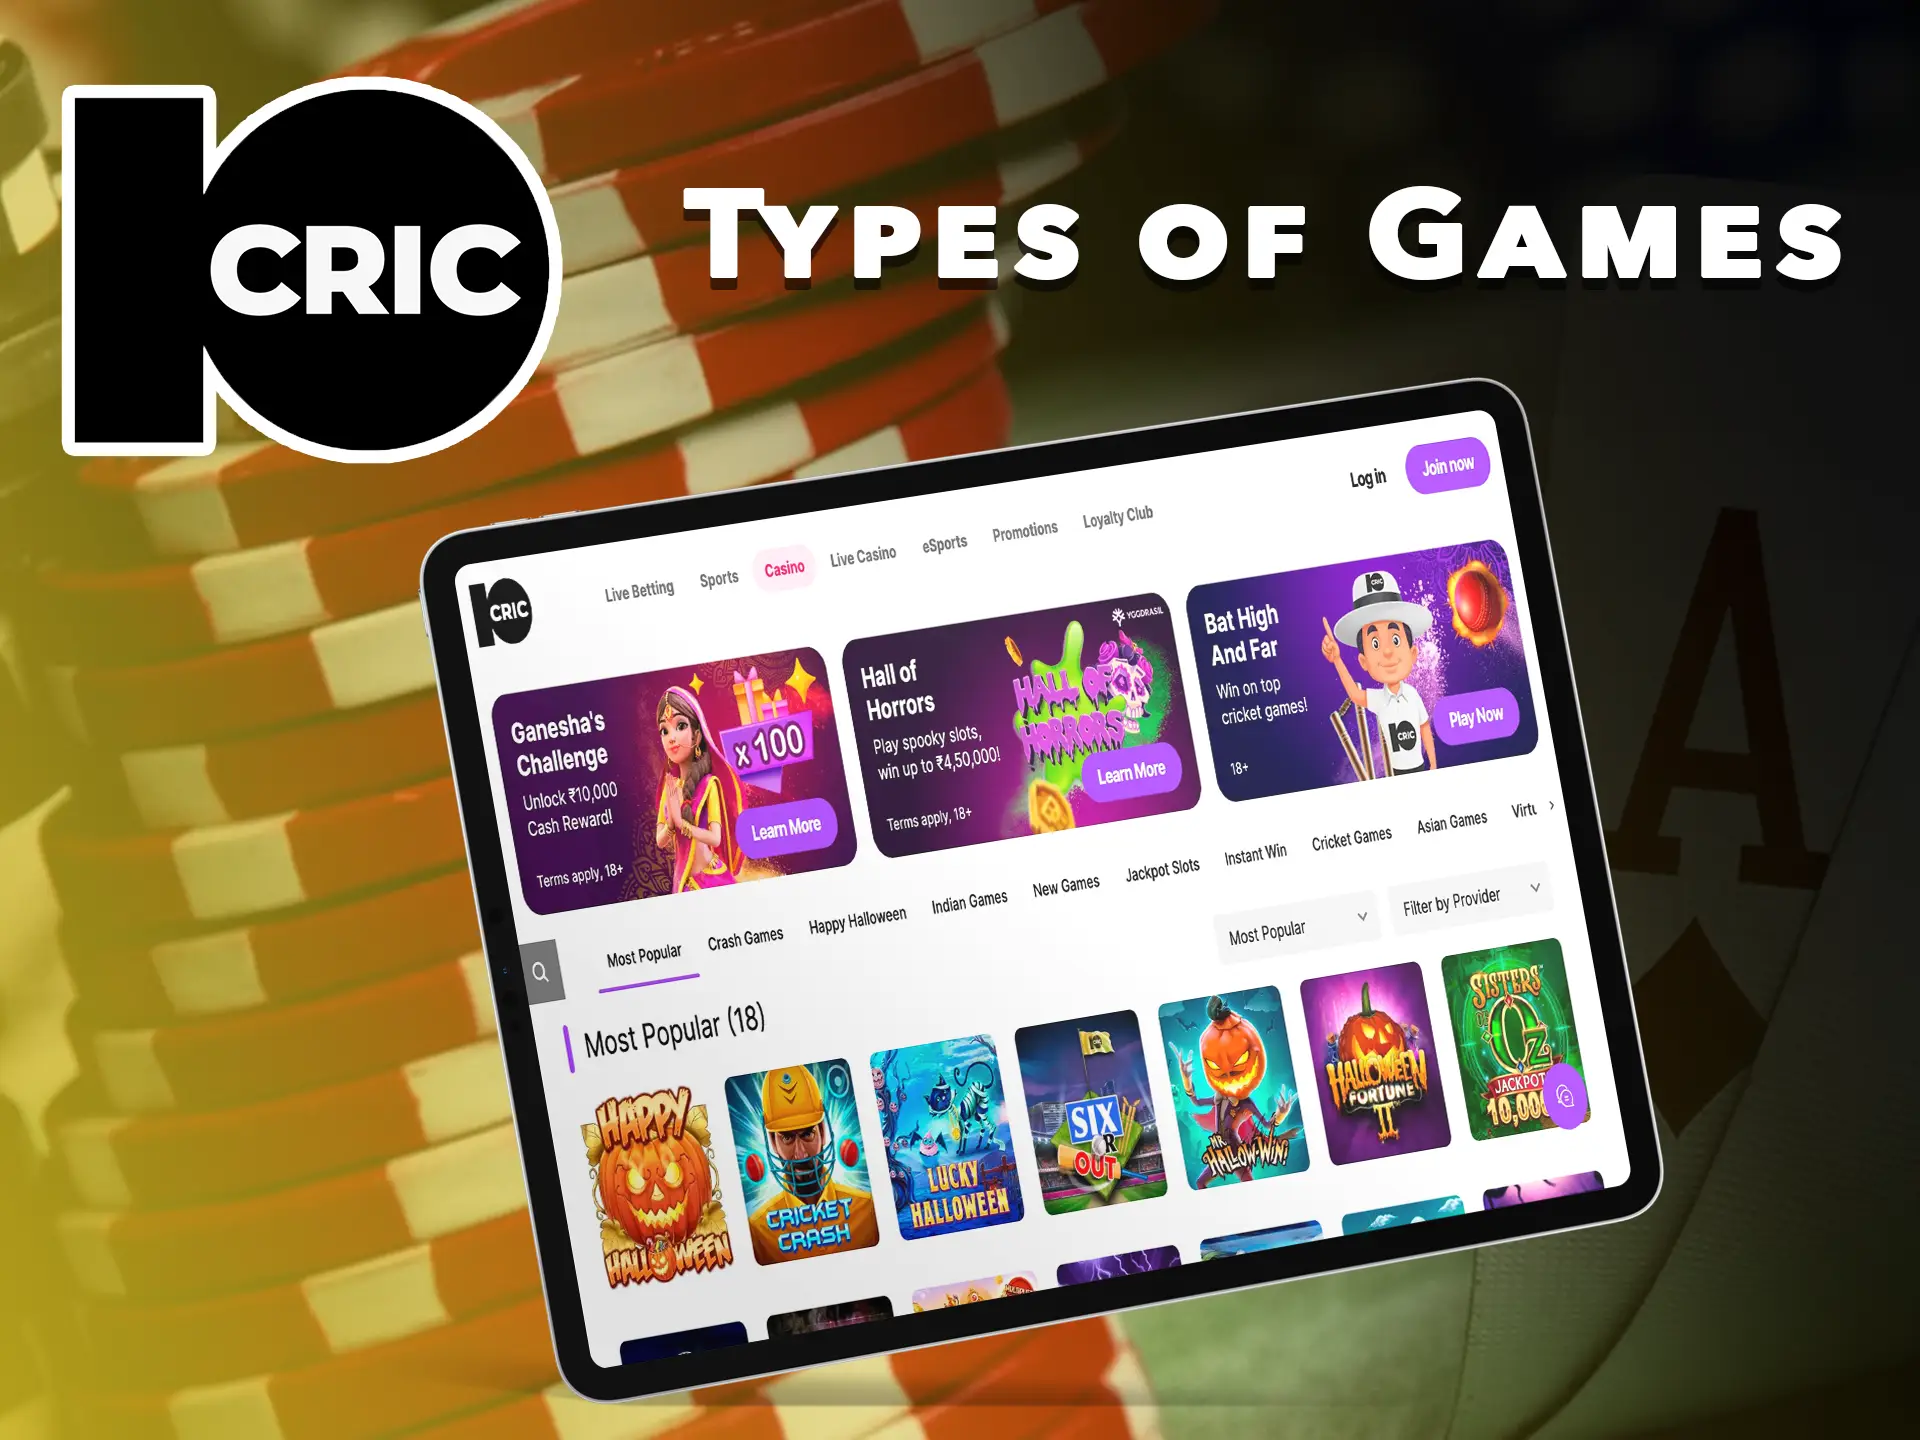 A huge number of games will give you a new casino experience from 10Cric and will not let you get bored.